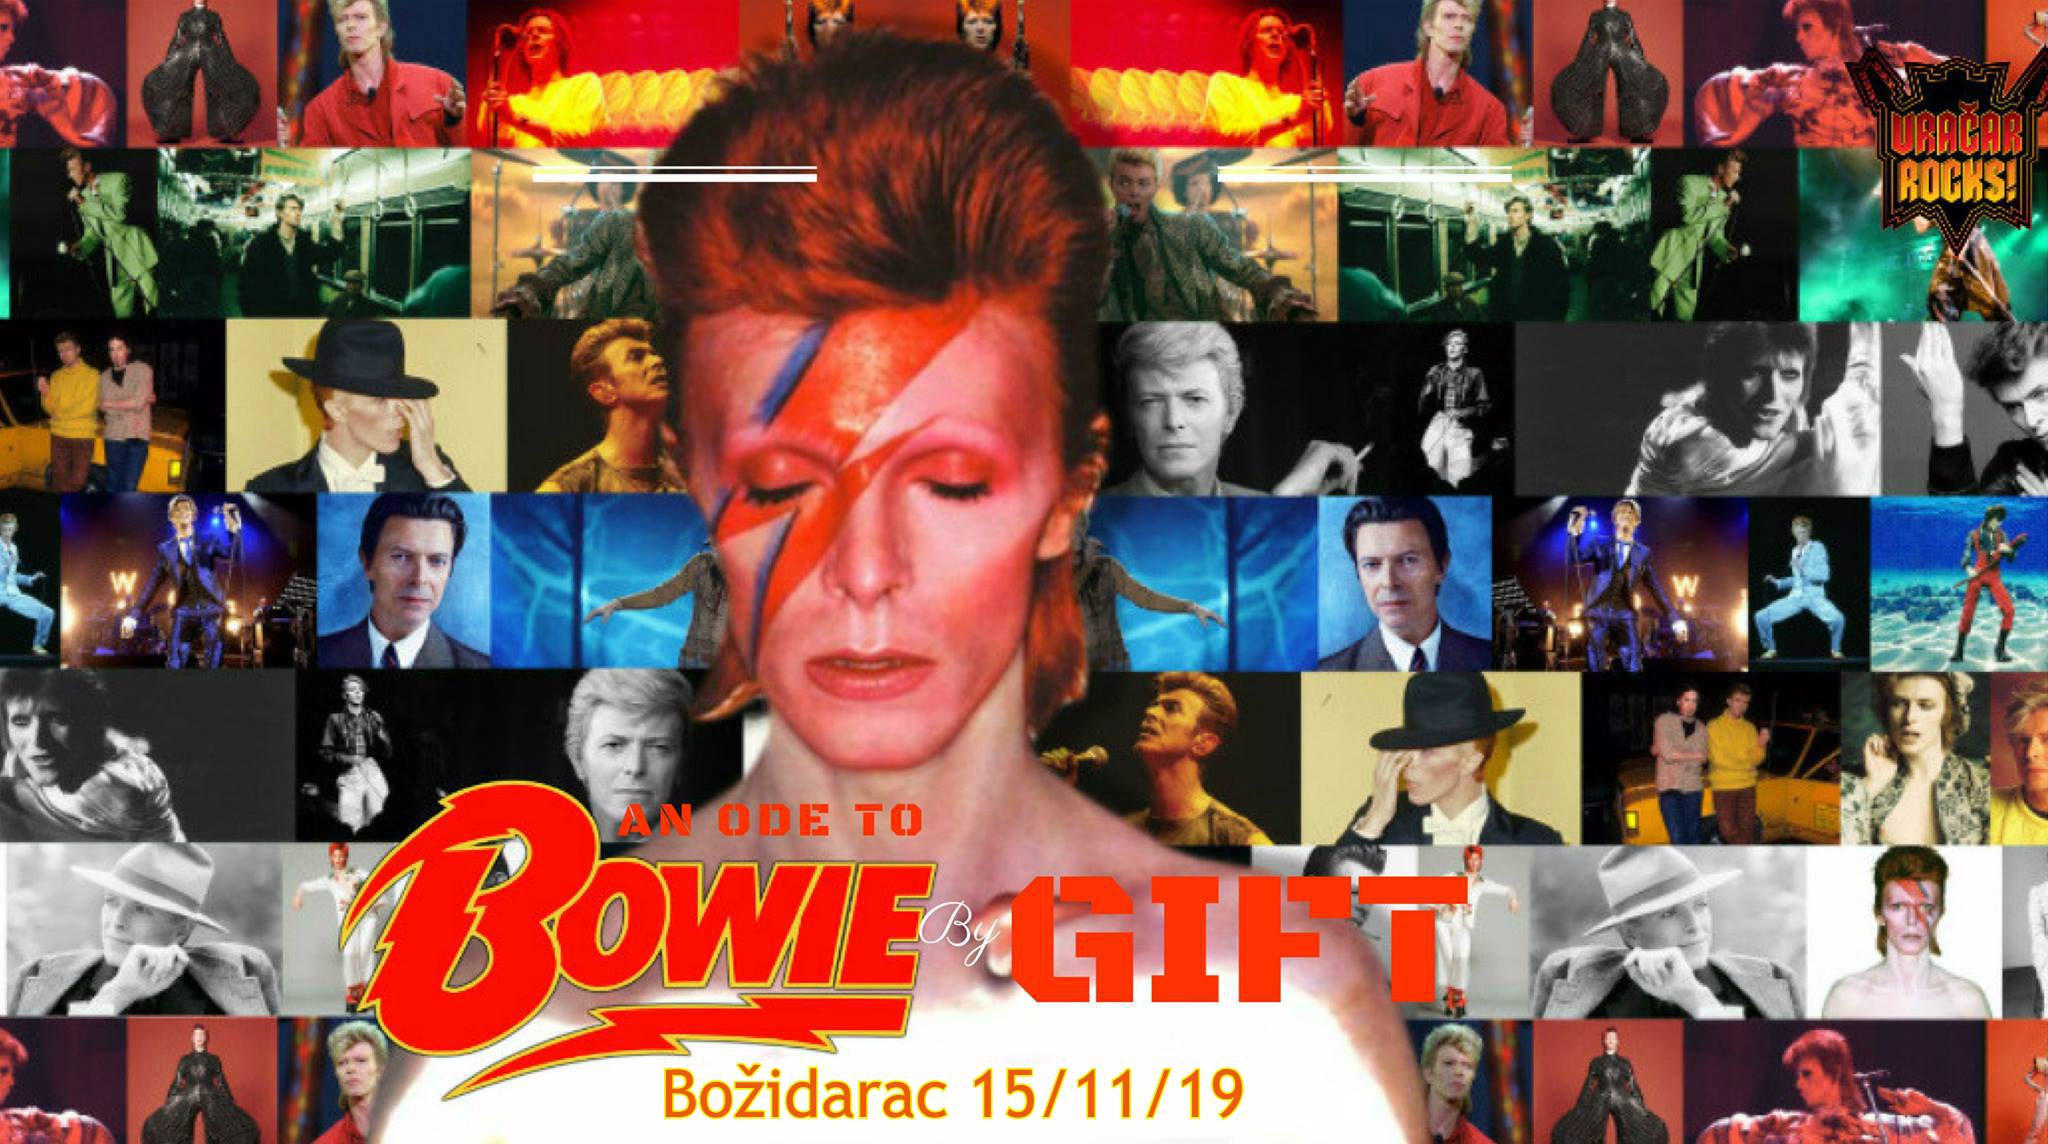 An ode to David Bowie by GIFT 15/11/2019 Božidarac